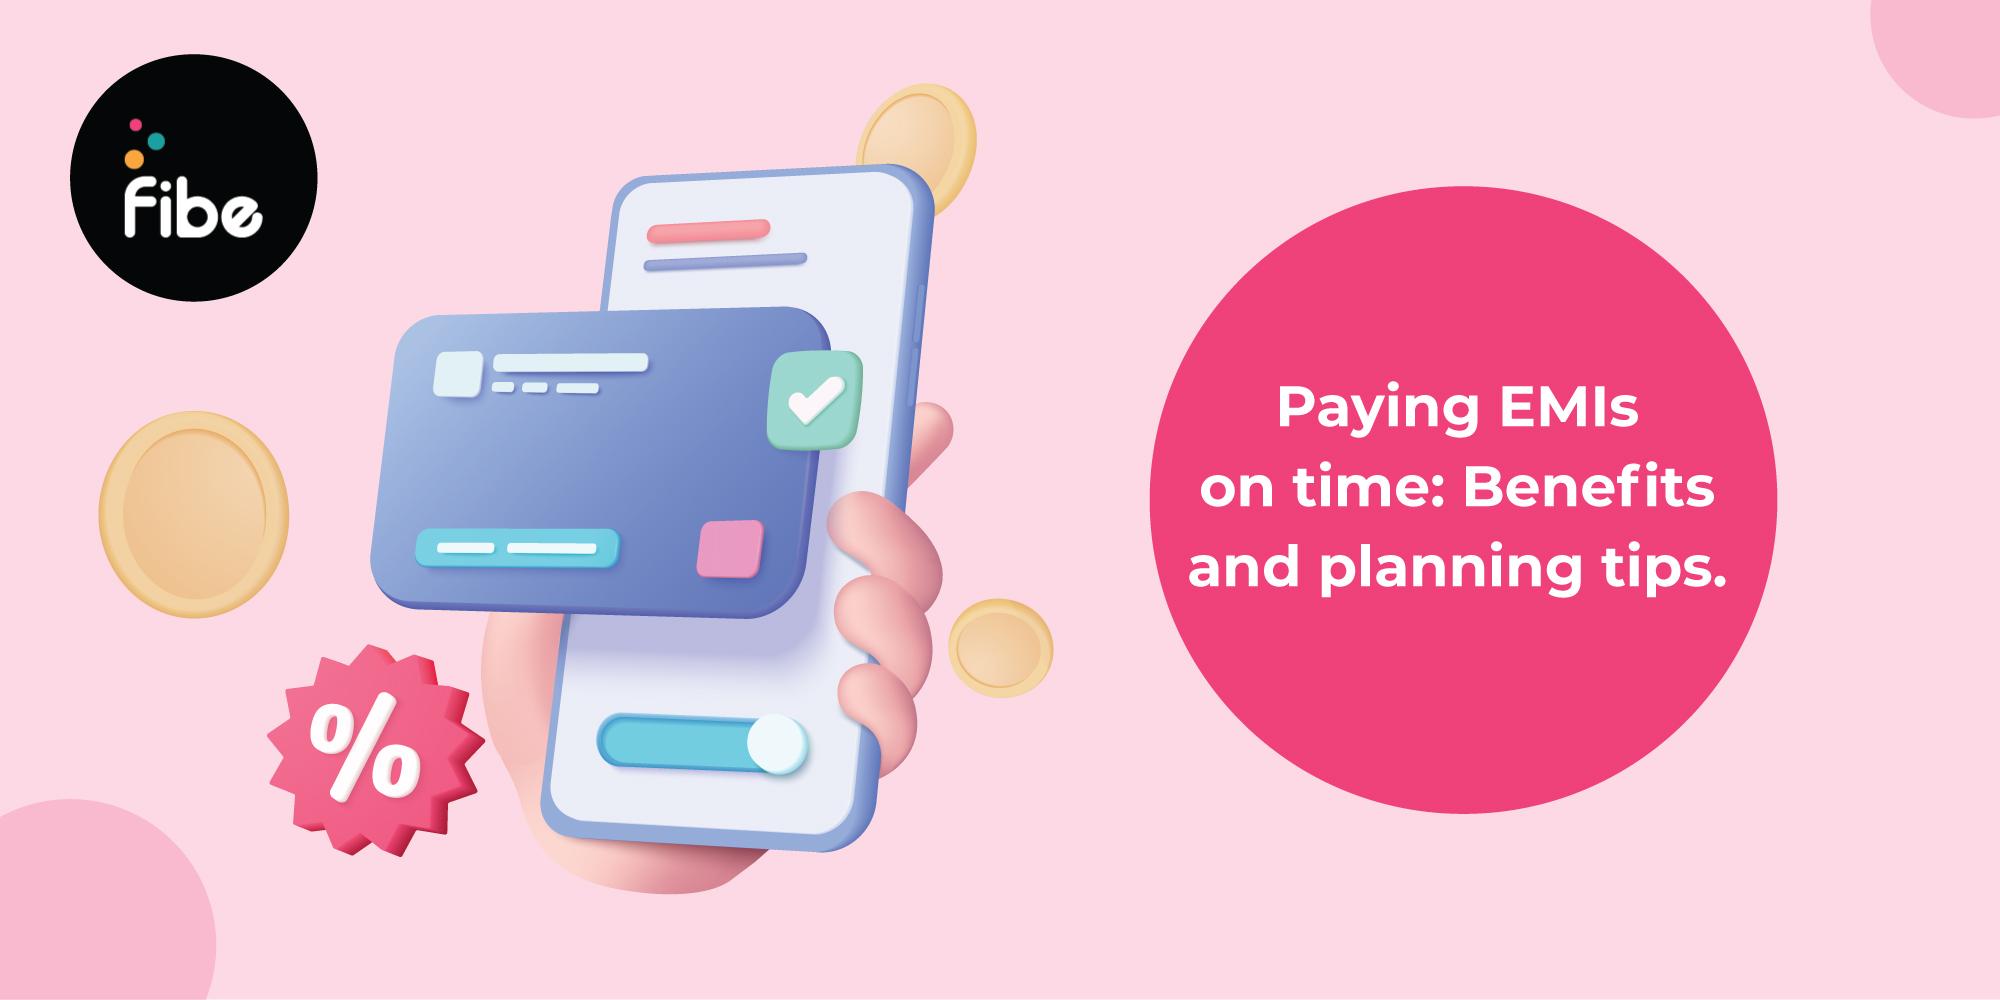 Know the Benefits of Making Timely EMI Payments